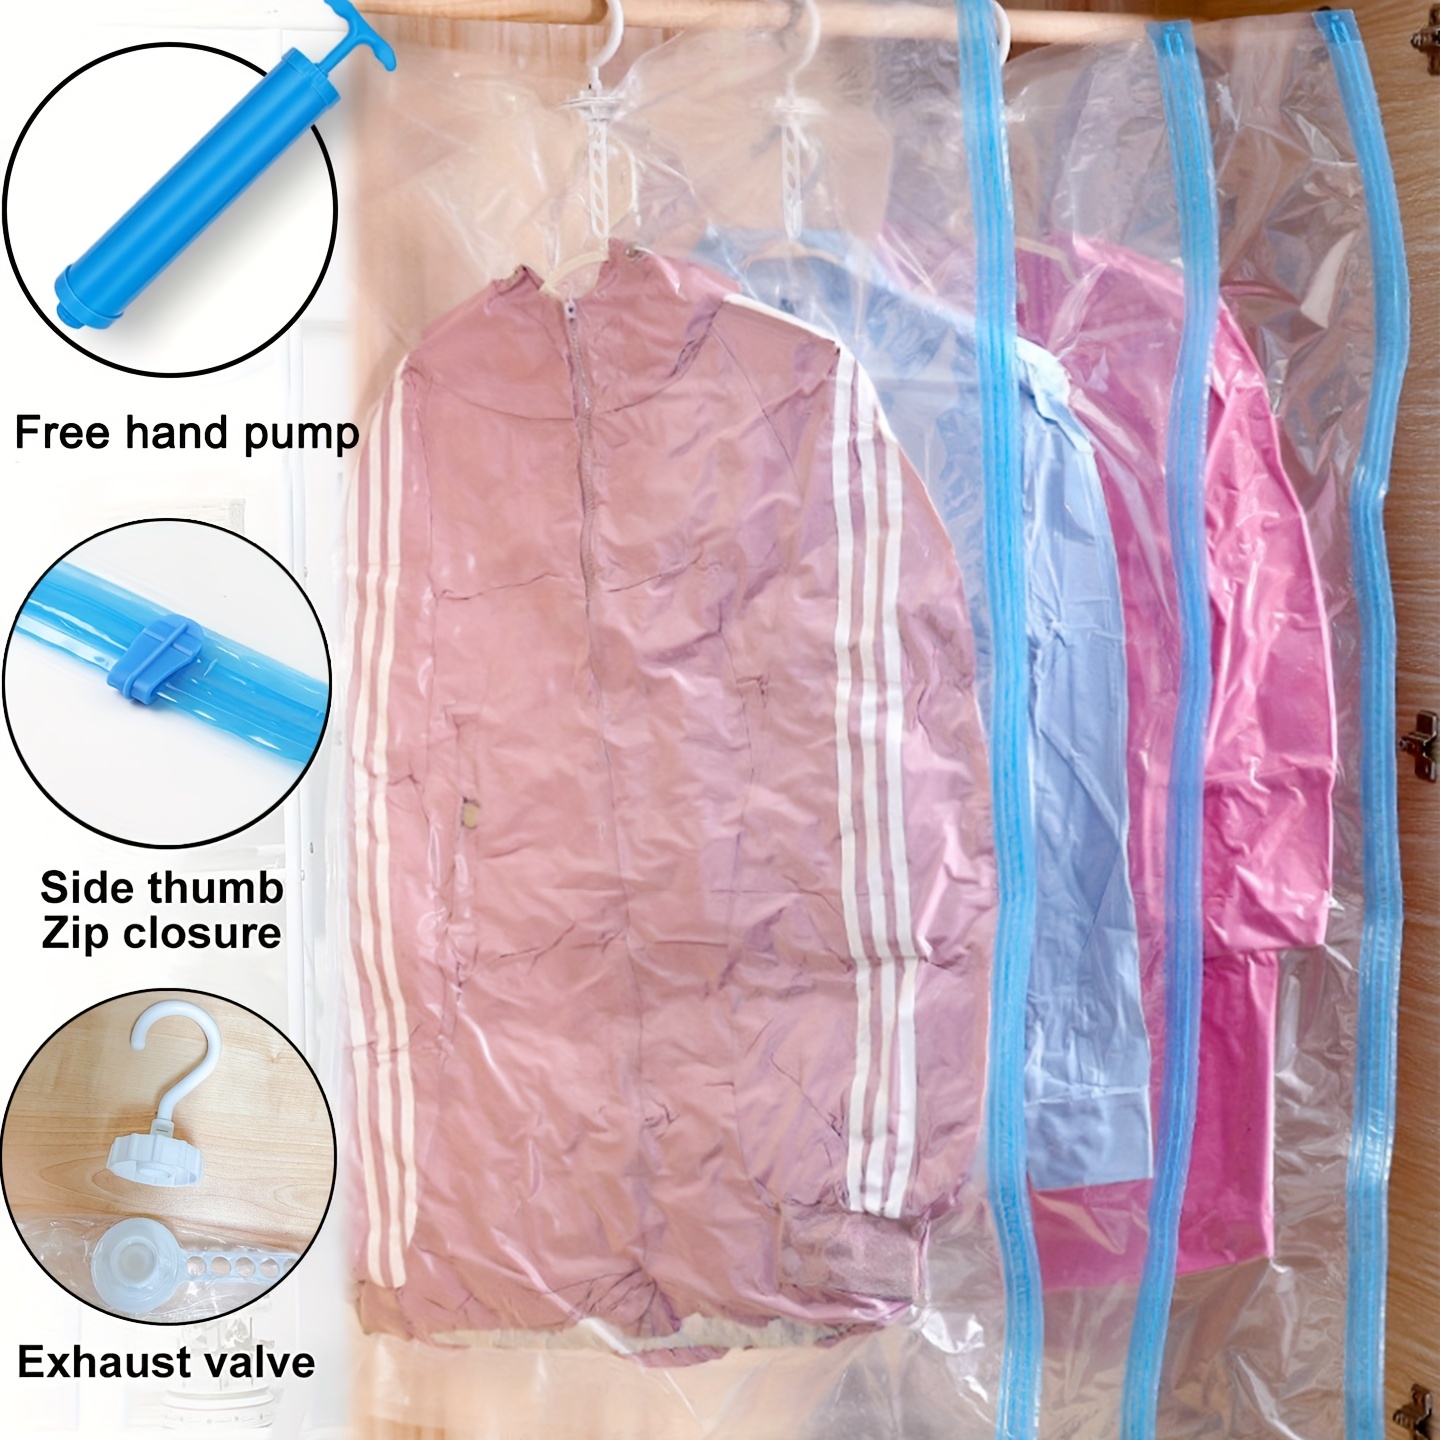 Thickened Vacuum Storage Bag for Shrink Bag Space Saving with Hand